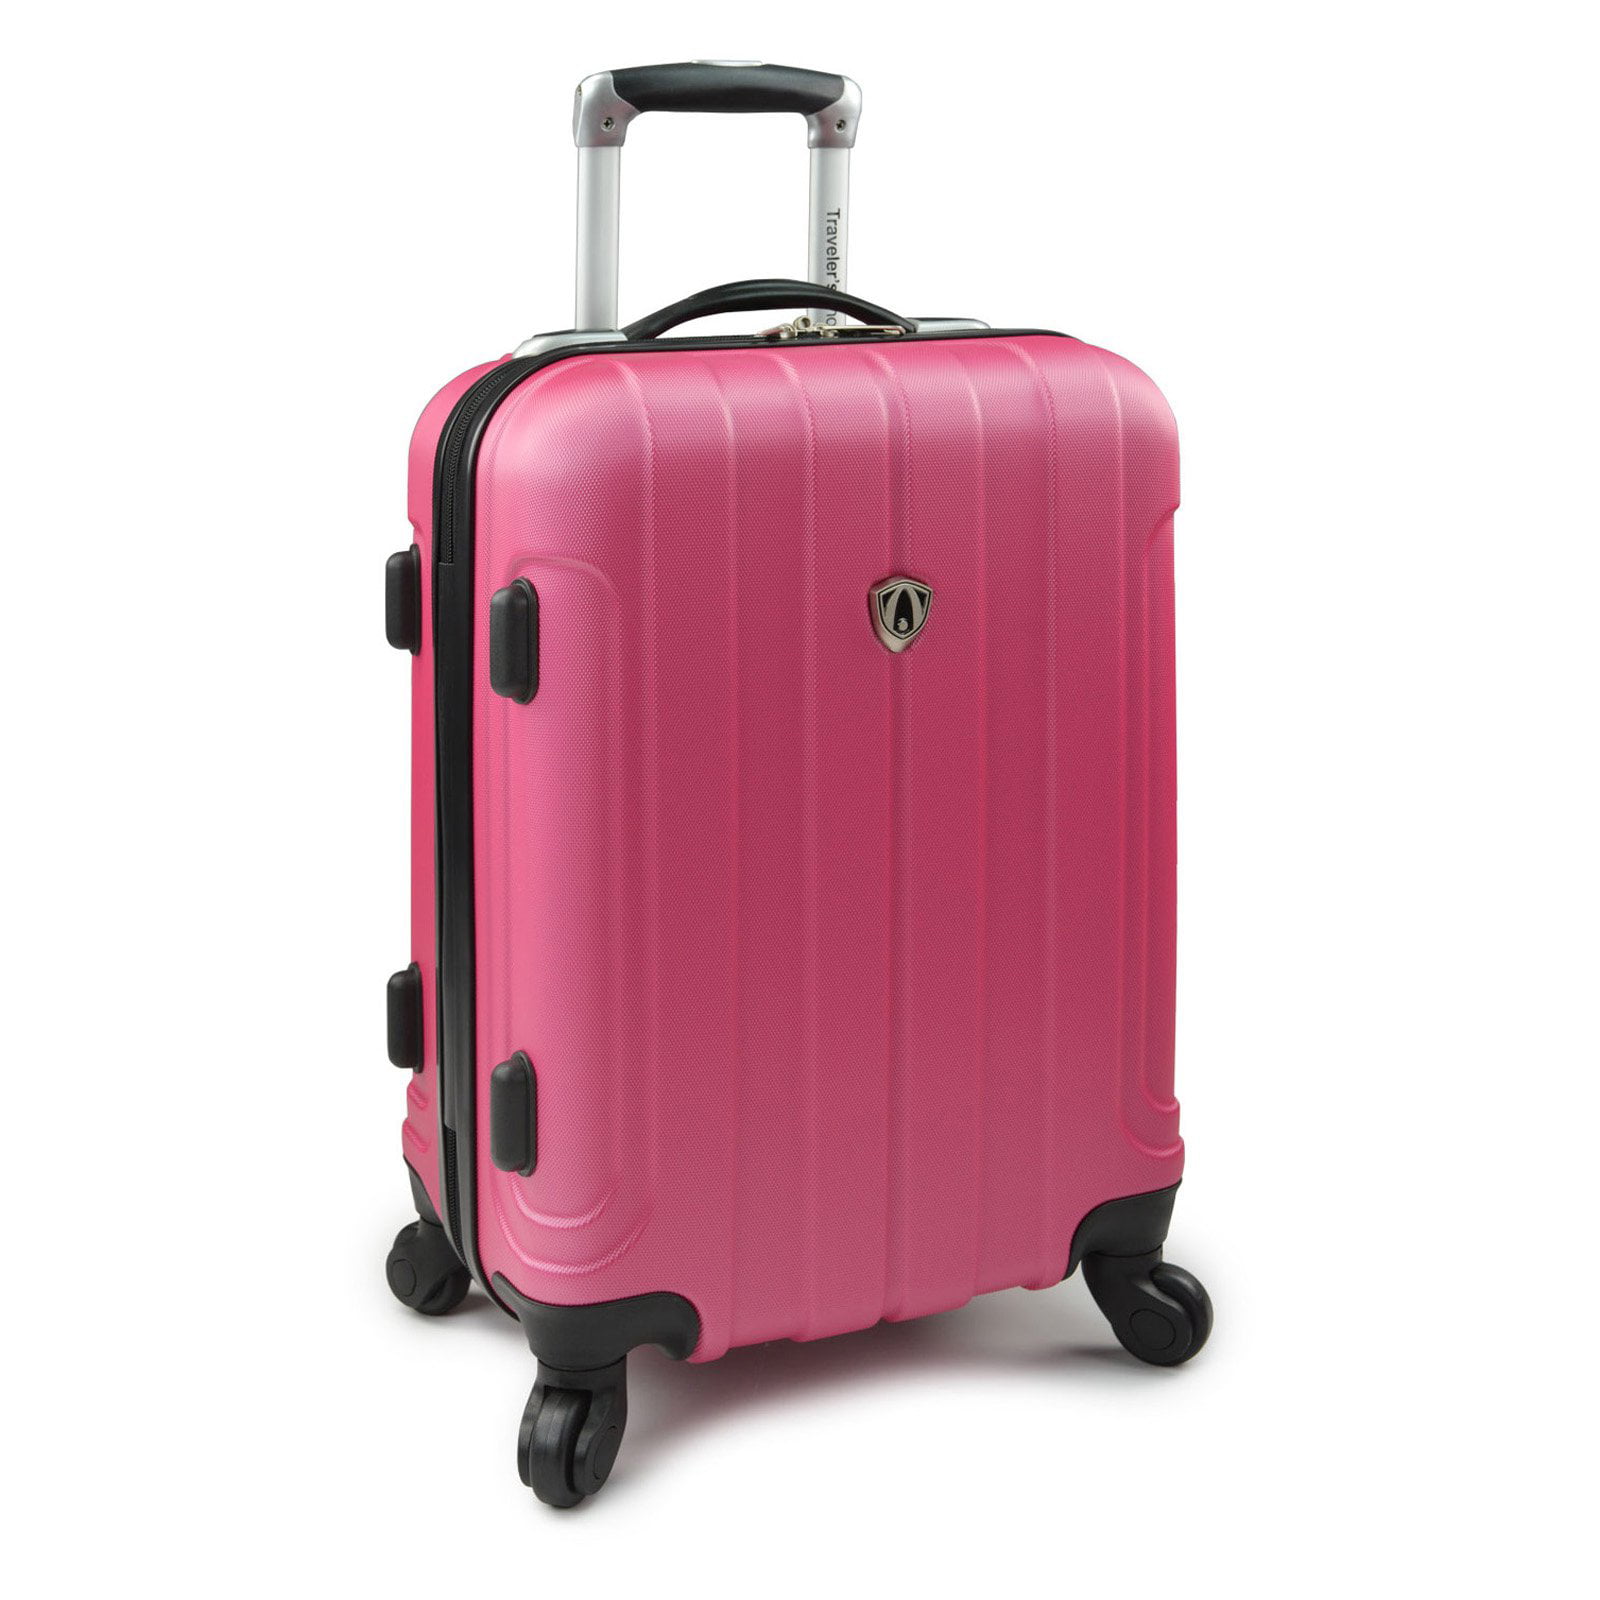 Traveler's Choice - Travelers Choice Cambridge 20 in. Carry-on ...